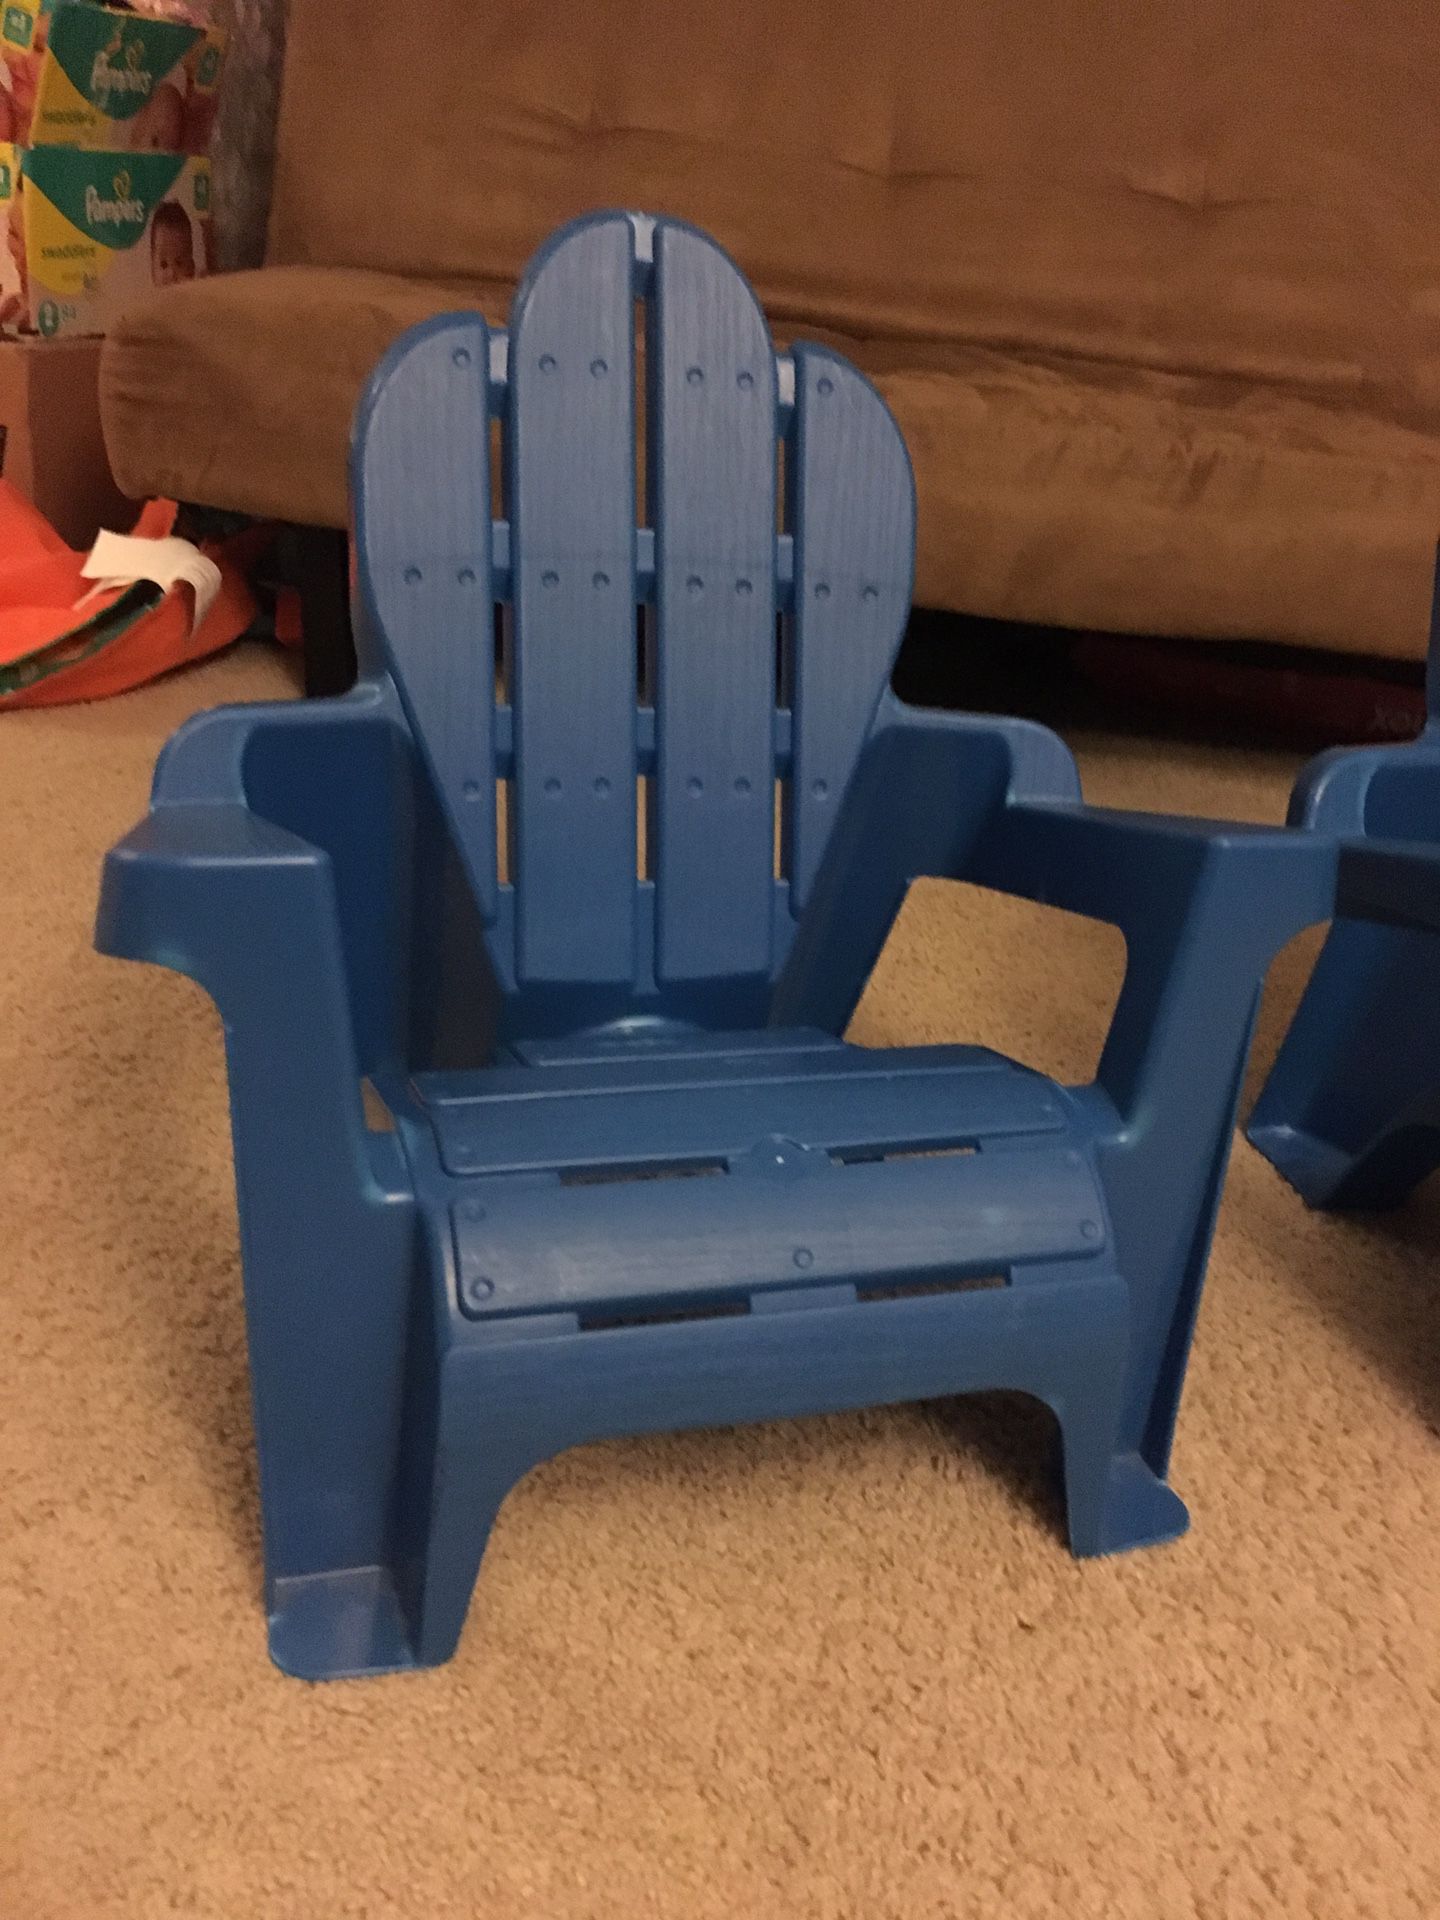 Chairs for toddlers / kids